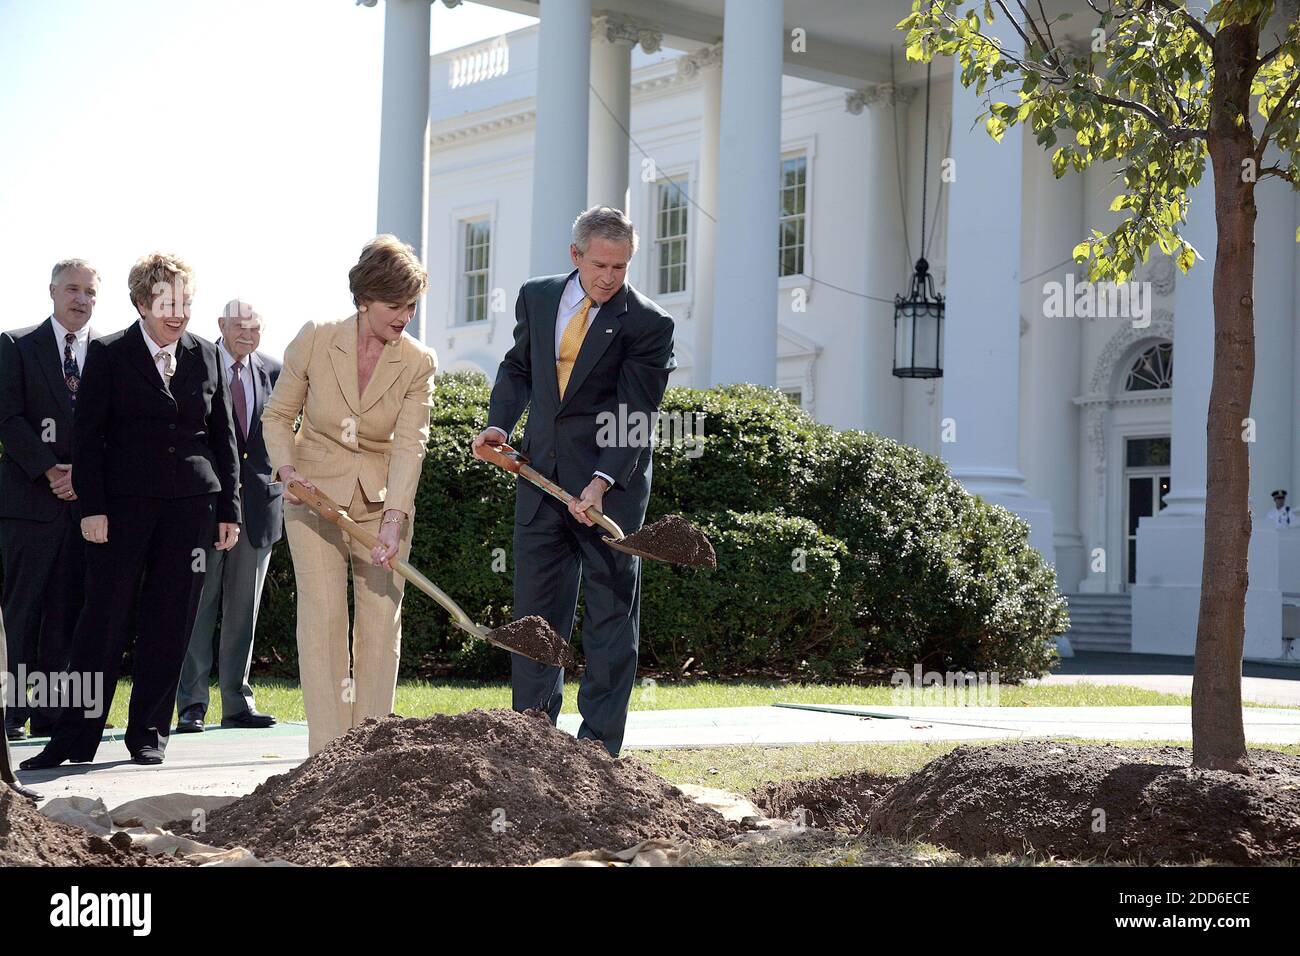 NO FILM, NO VIDEO, NO TV, NO DOCUMENTARY - President George W. Bush and First Lady Laura Bush take part in a ceremony planting a Jefferson Elm on the North Lawn of the White House in Washington, DC, USA on October 2, 2006. The tree replaces an American Elm that was damaged in a storm this summer. Photo by Chuck Kennedy/MCT/ABACAPRESS.COM Stock Photo